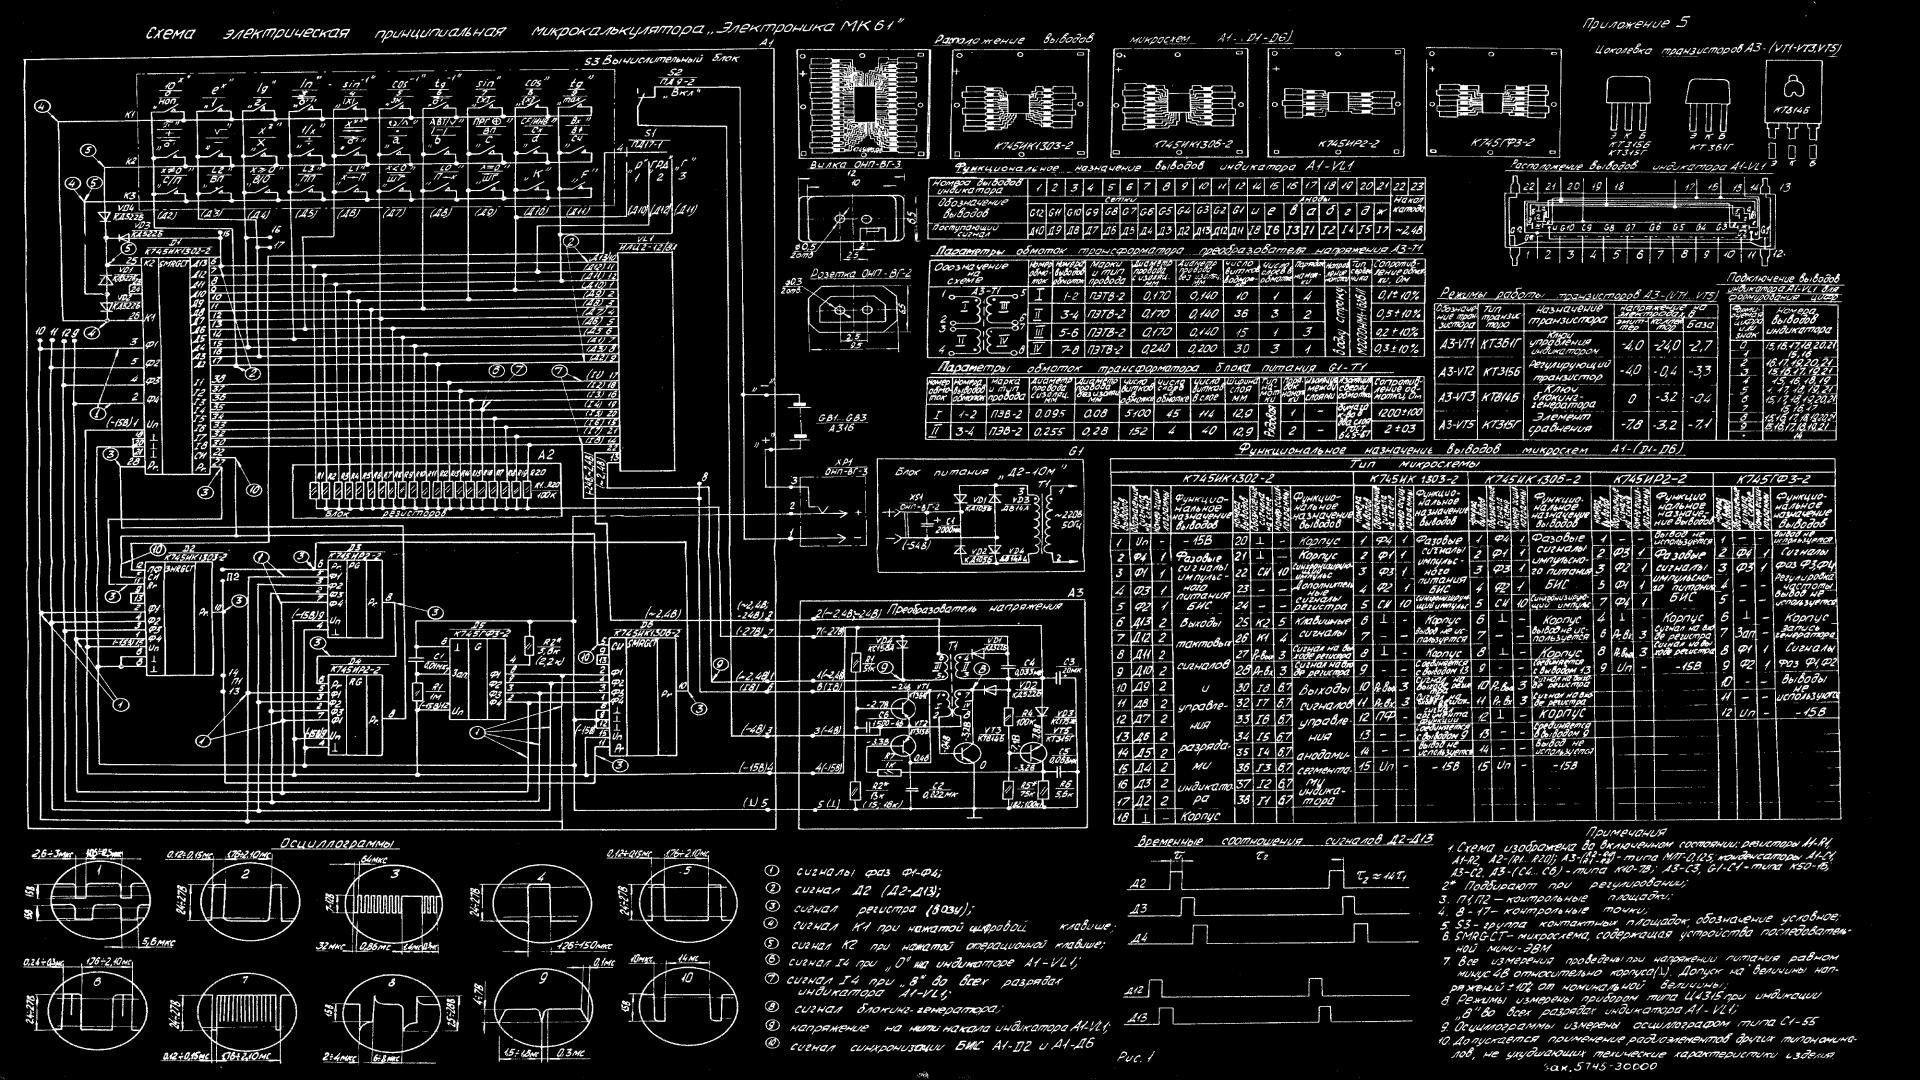 General 1920x1080 microchip integrated circuits waveforms schematic Russian. Electronics wallpaper, Computer wallpaper desktop wallpaper, Wallpaper